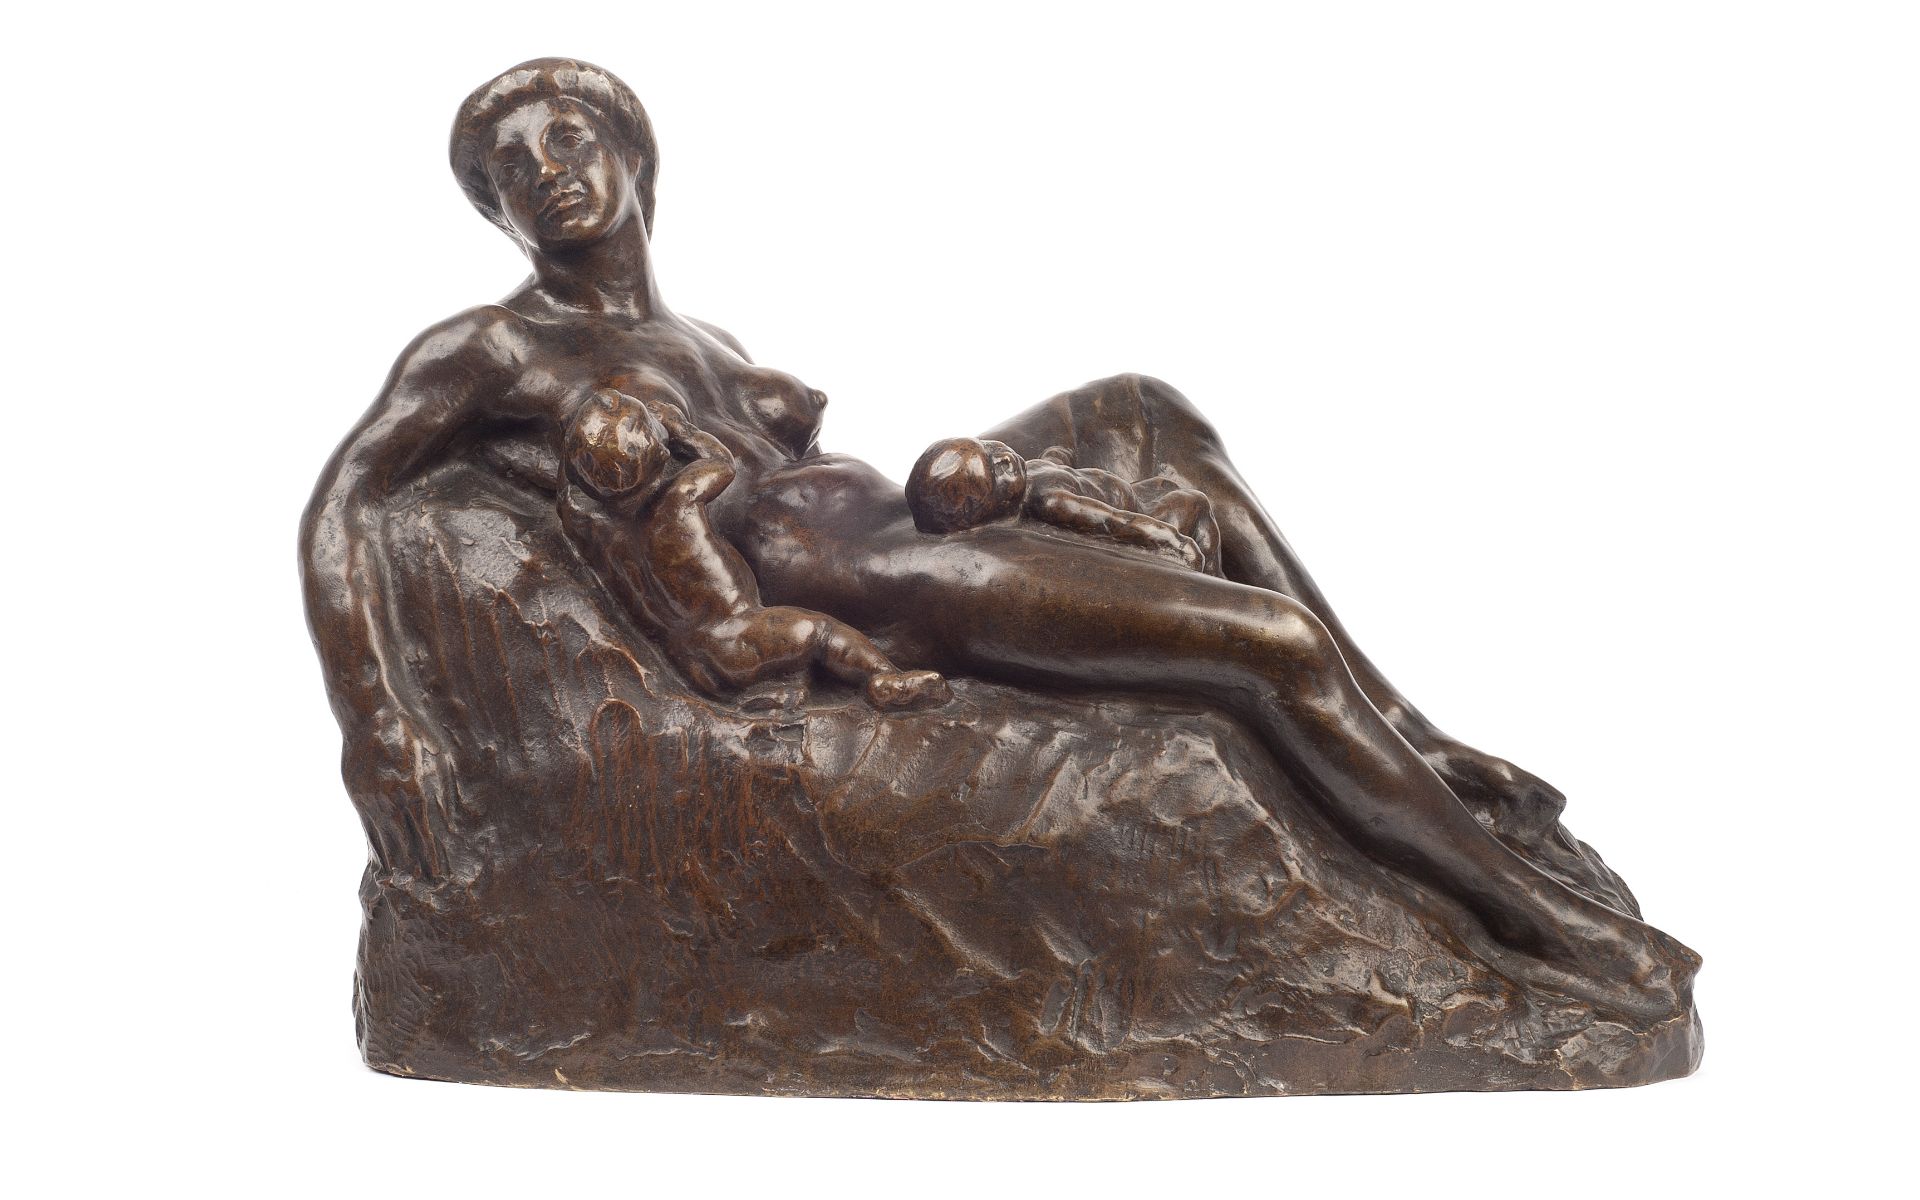 AN EARLY 20TH CENTURY MODERNIST BRONZE OF A MOTHER AND BABIES